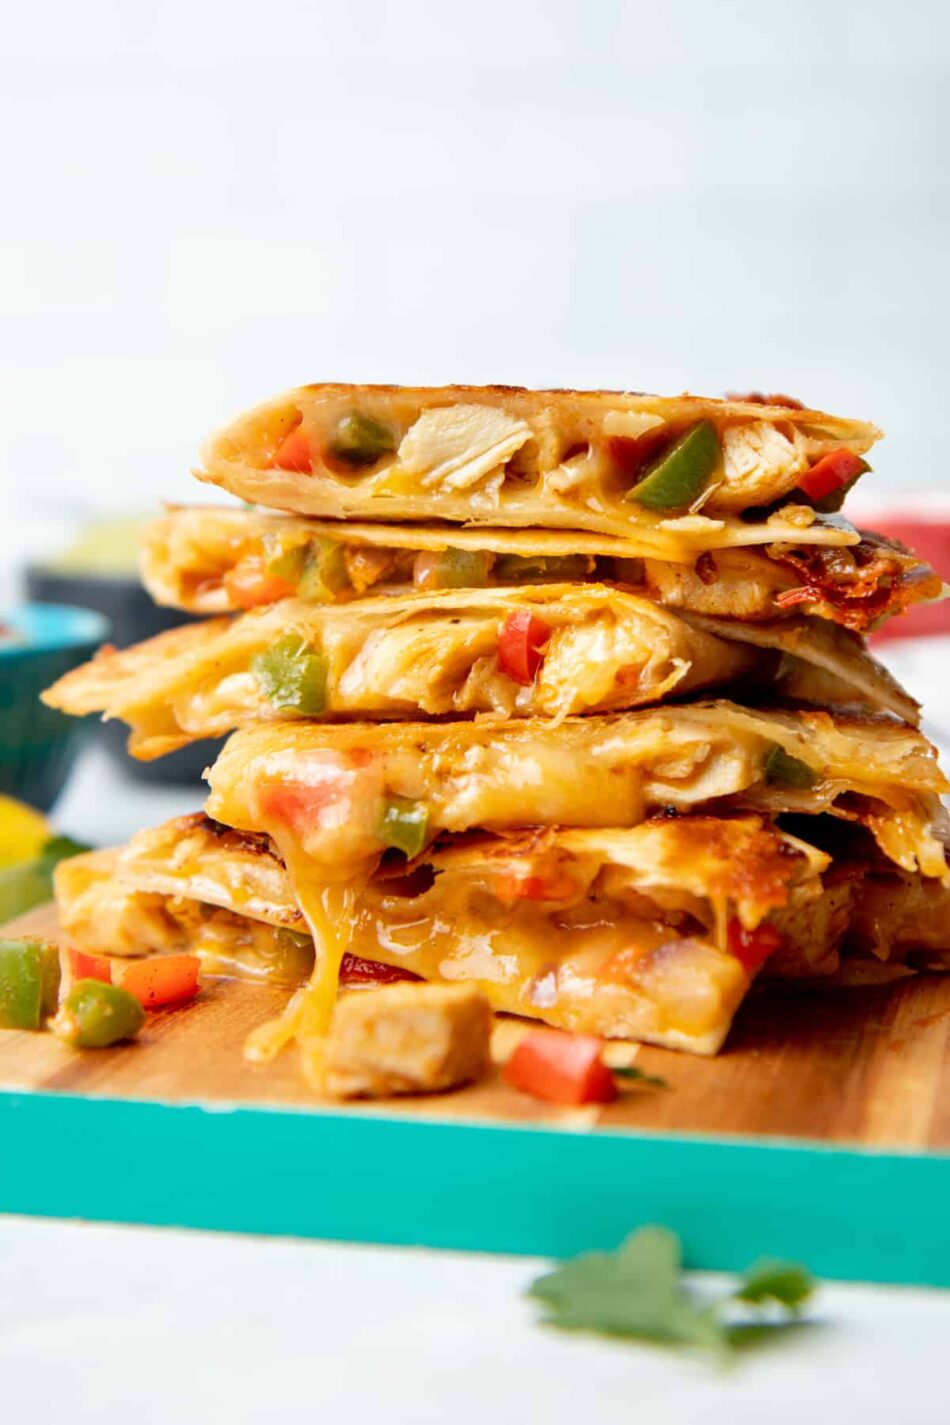 How to Make Easy Chicken Quesadillas | Wholefully